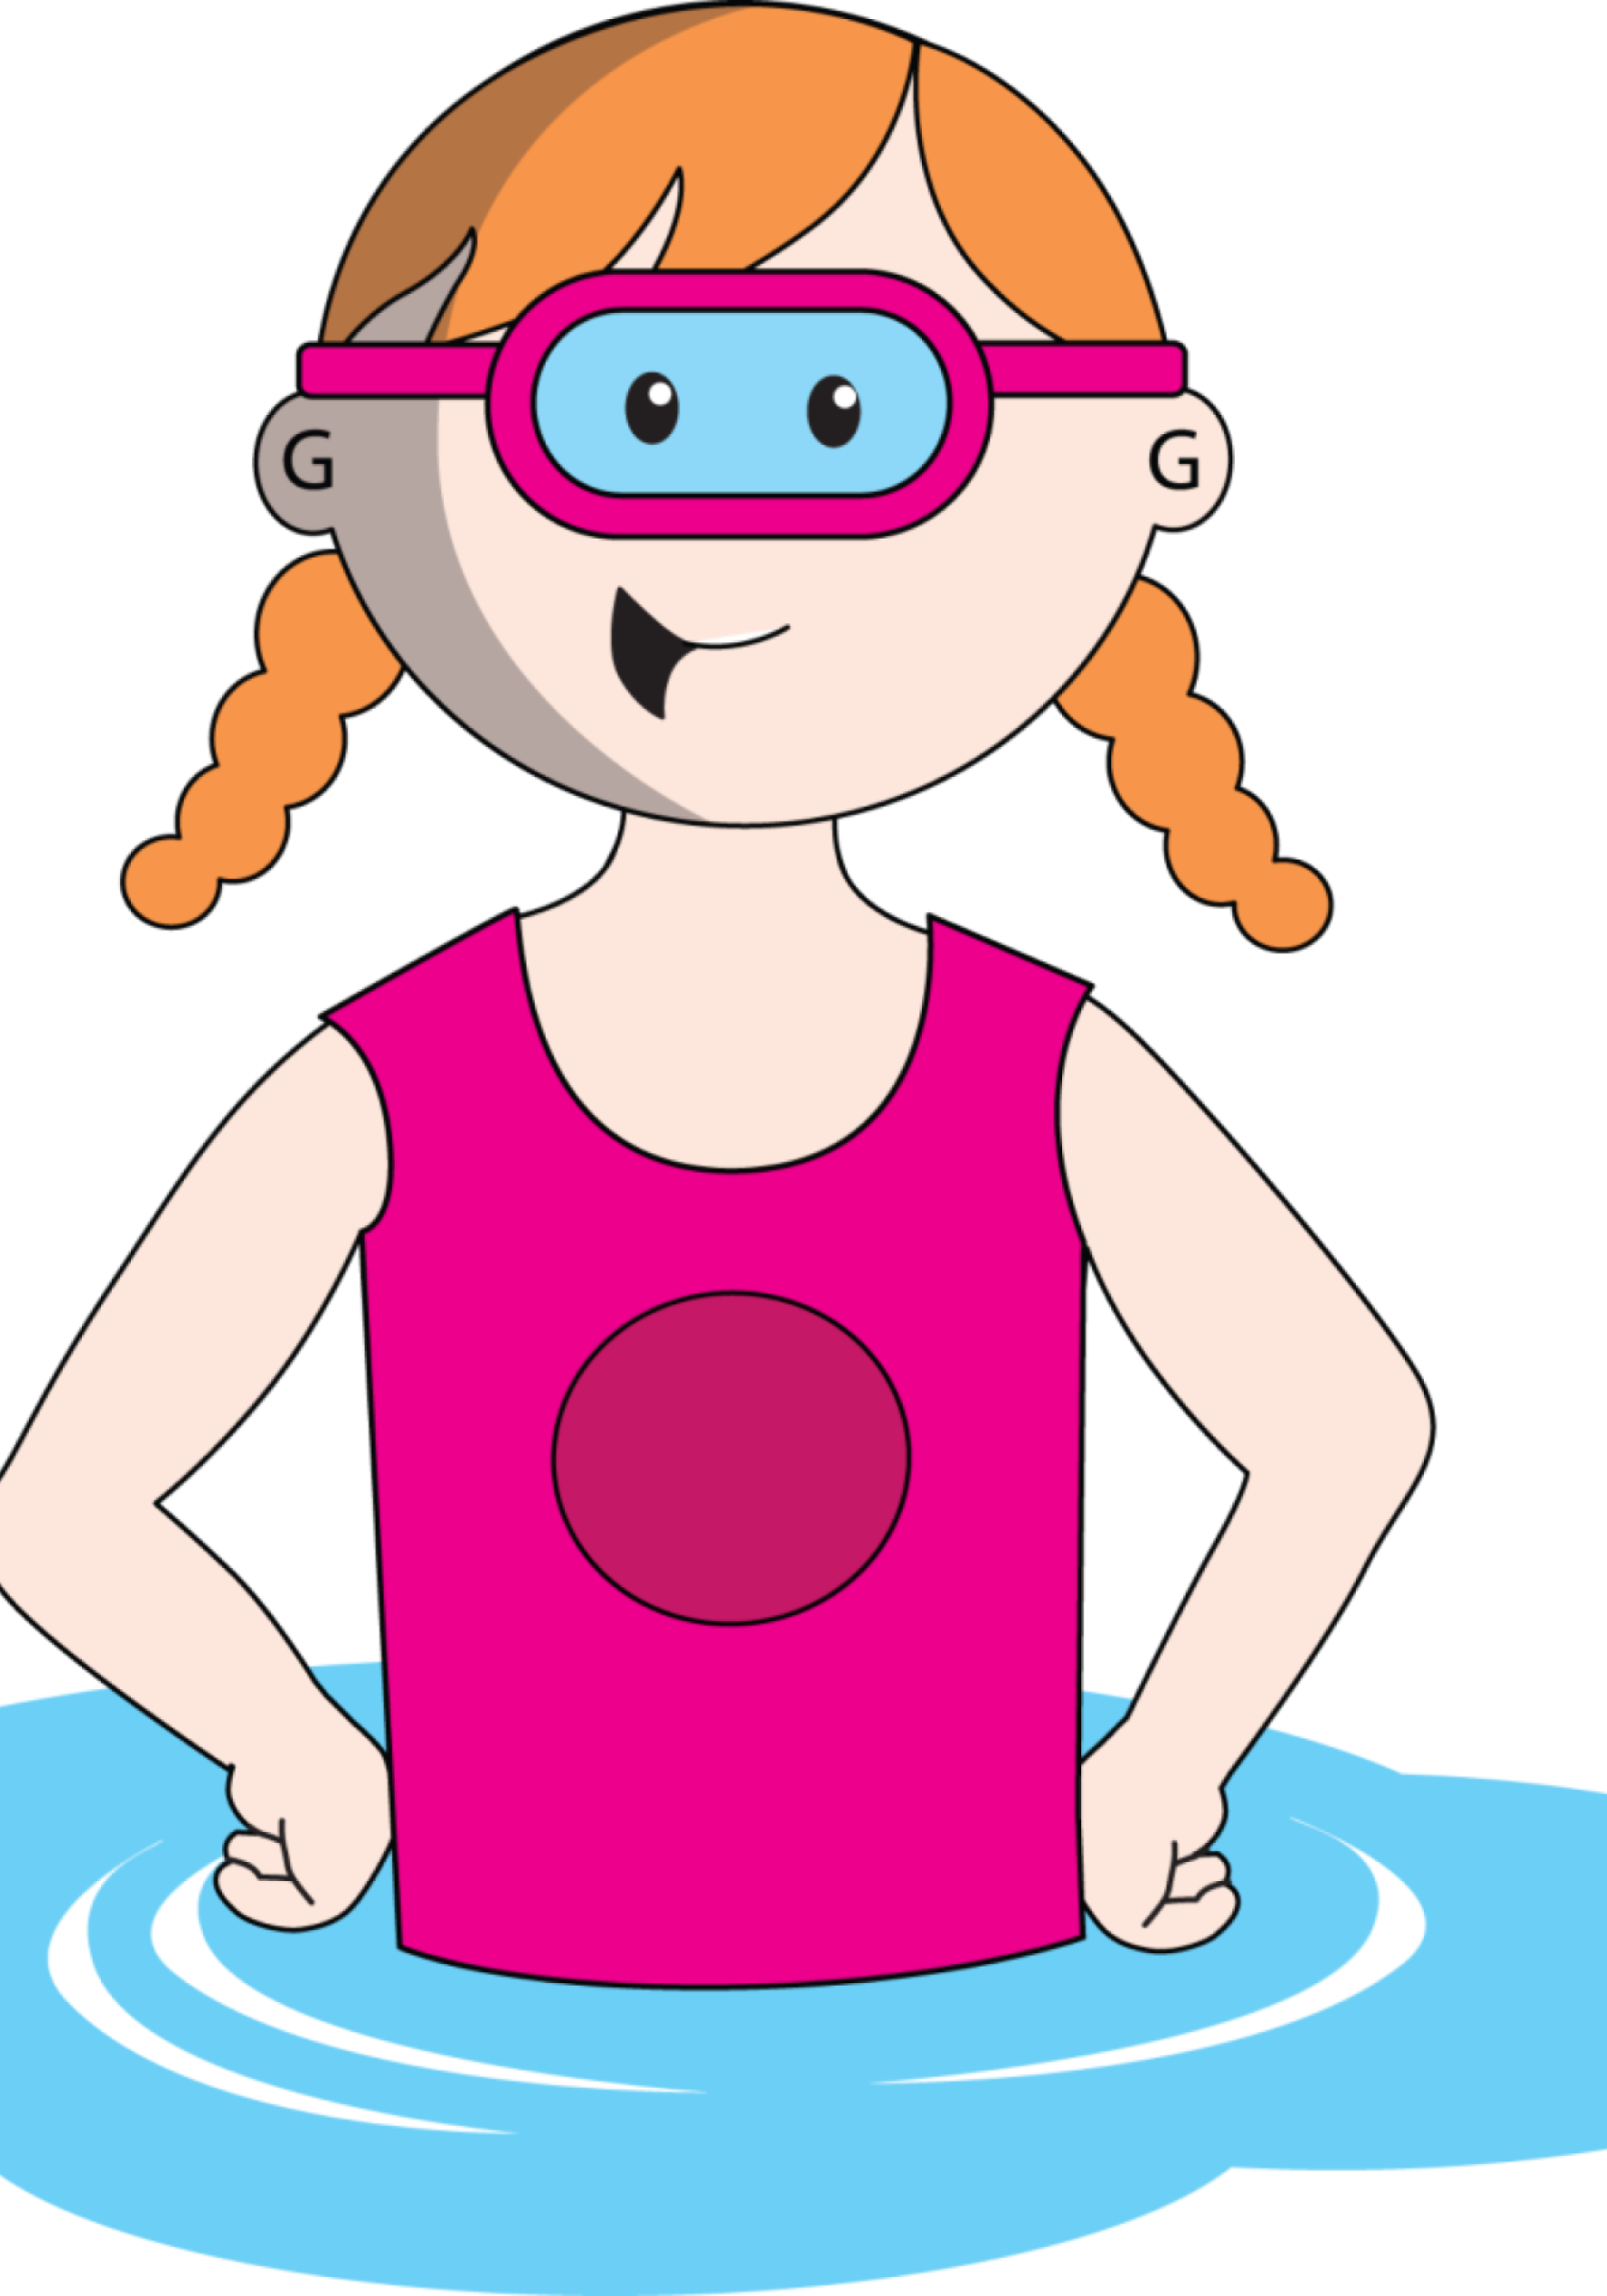 Cartoon of a girl with braided hair and goggles, wearing a pink sleeveless top and standing in water, designed for children's occupational therapy.